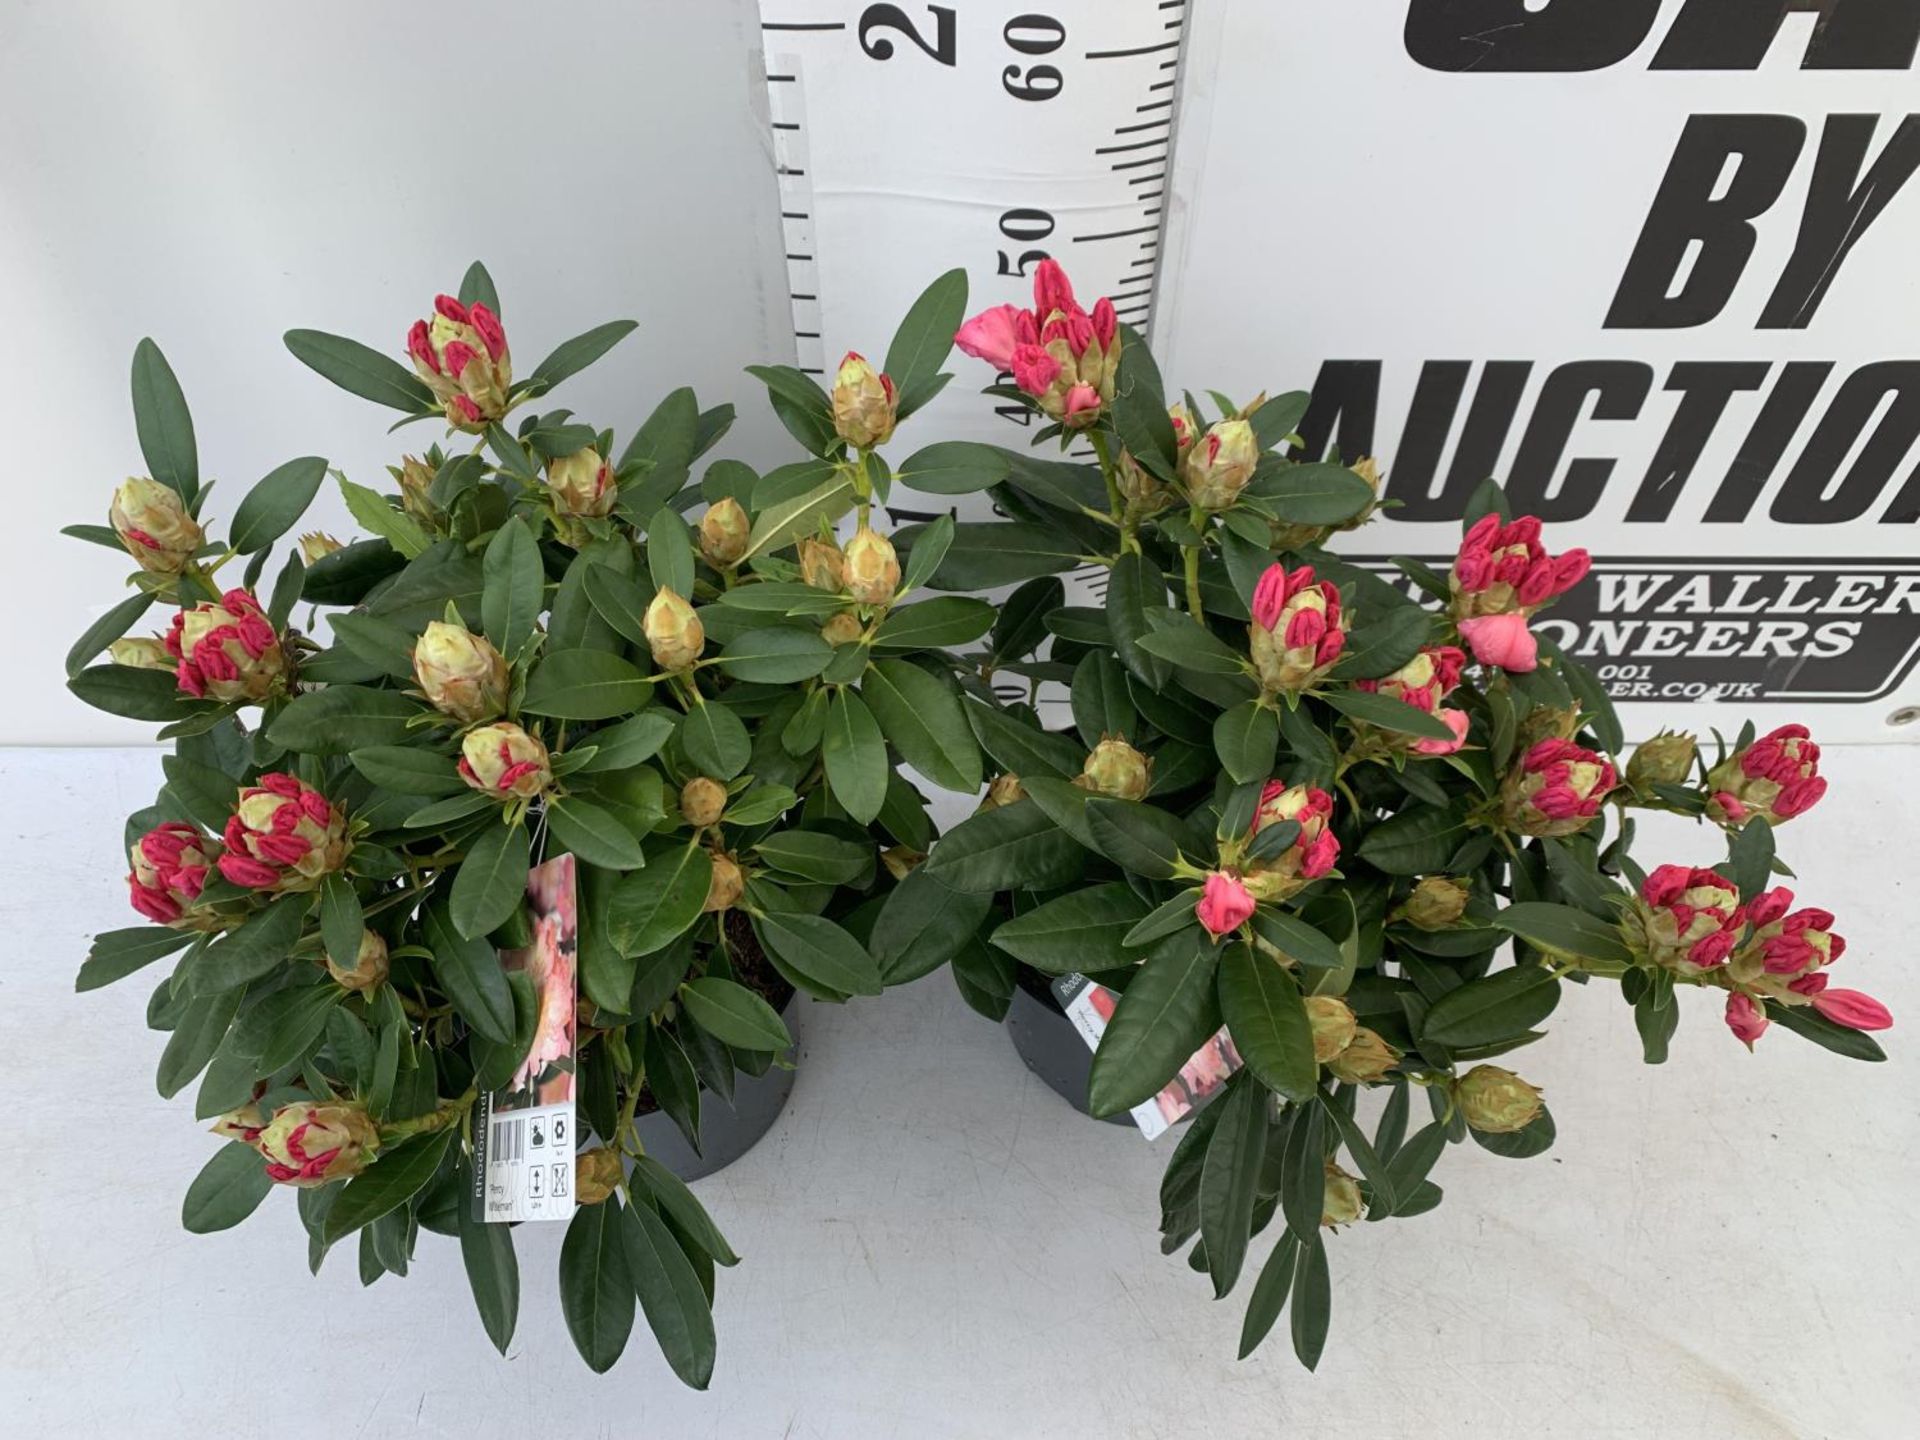 TWO RHODODENDRONS RED 'PERCY WISEMAN' IN 5 LTR POTS 60CM TALL PLUS VAT TO BE SOLD FOR THE TWO - Image 2 of 4